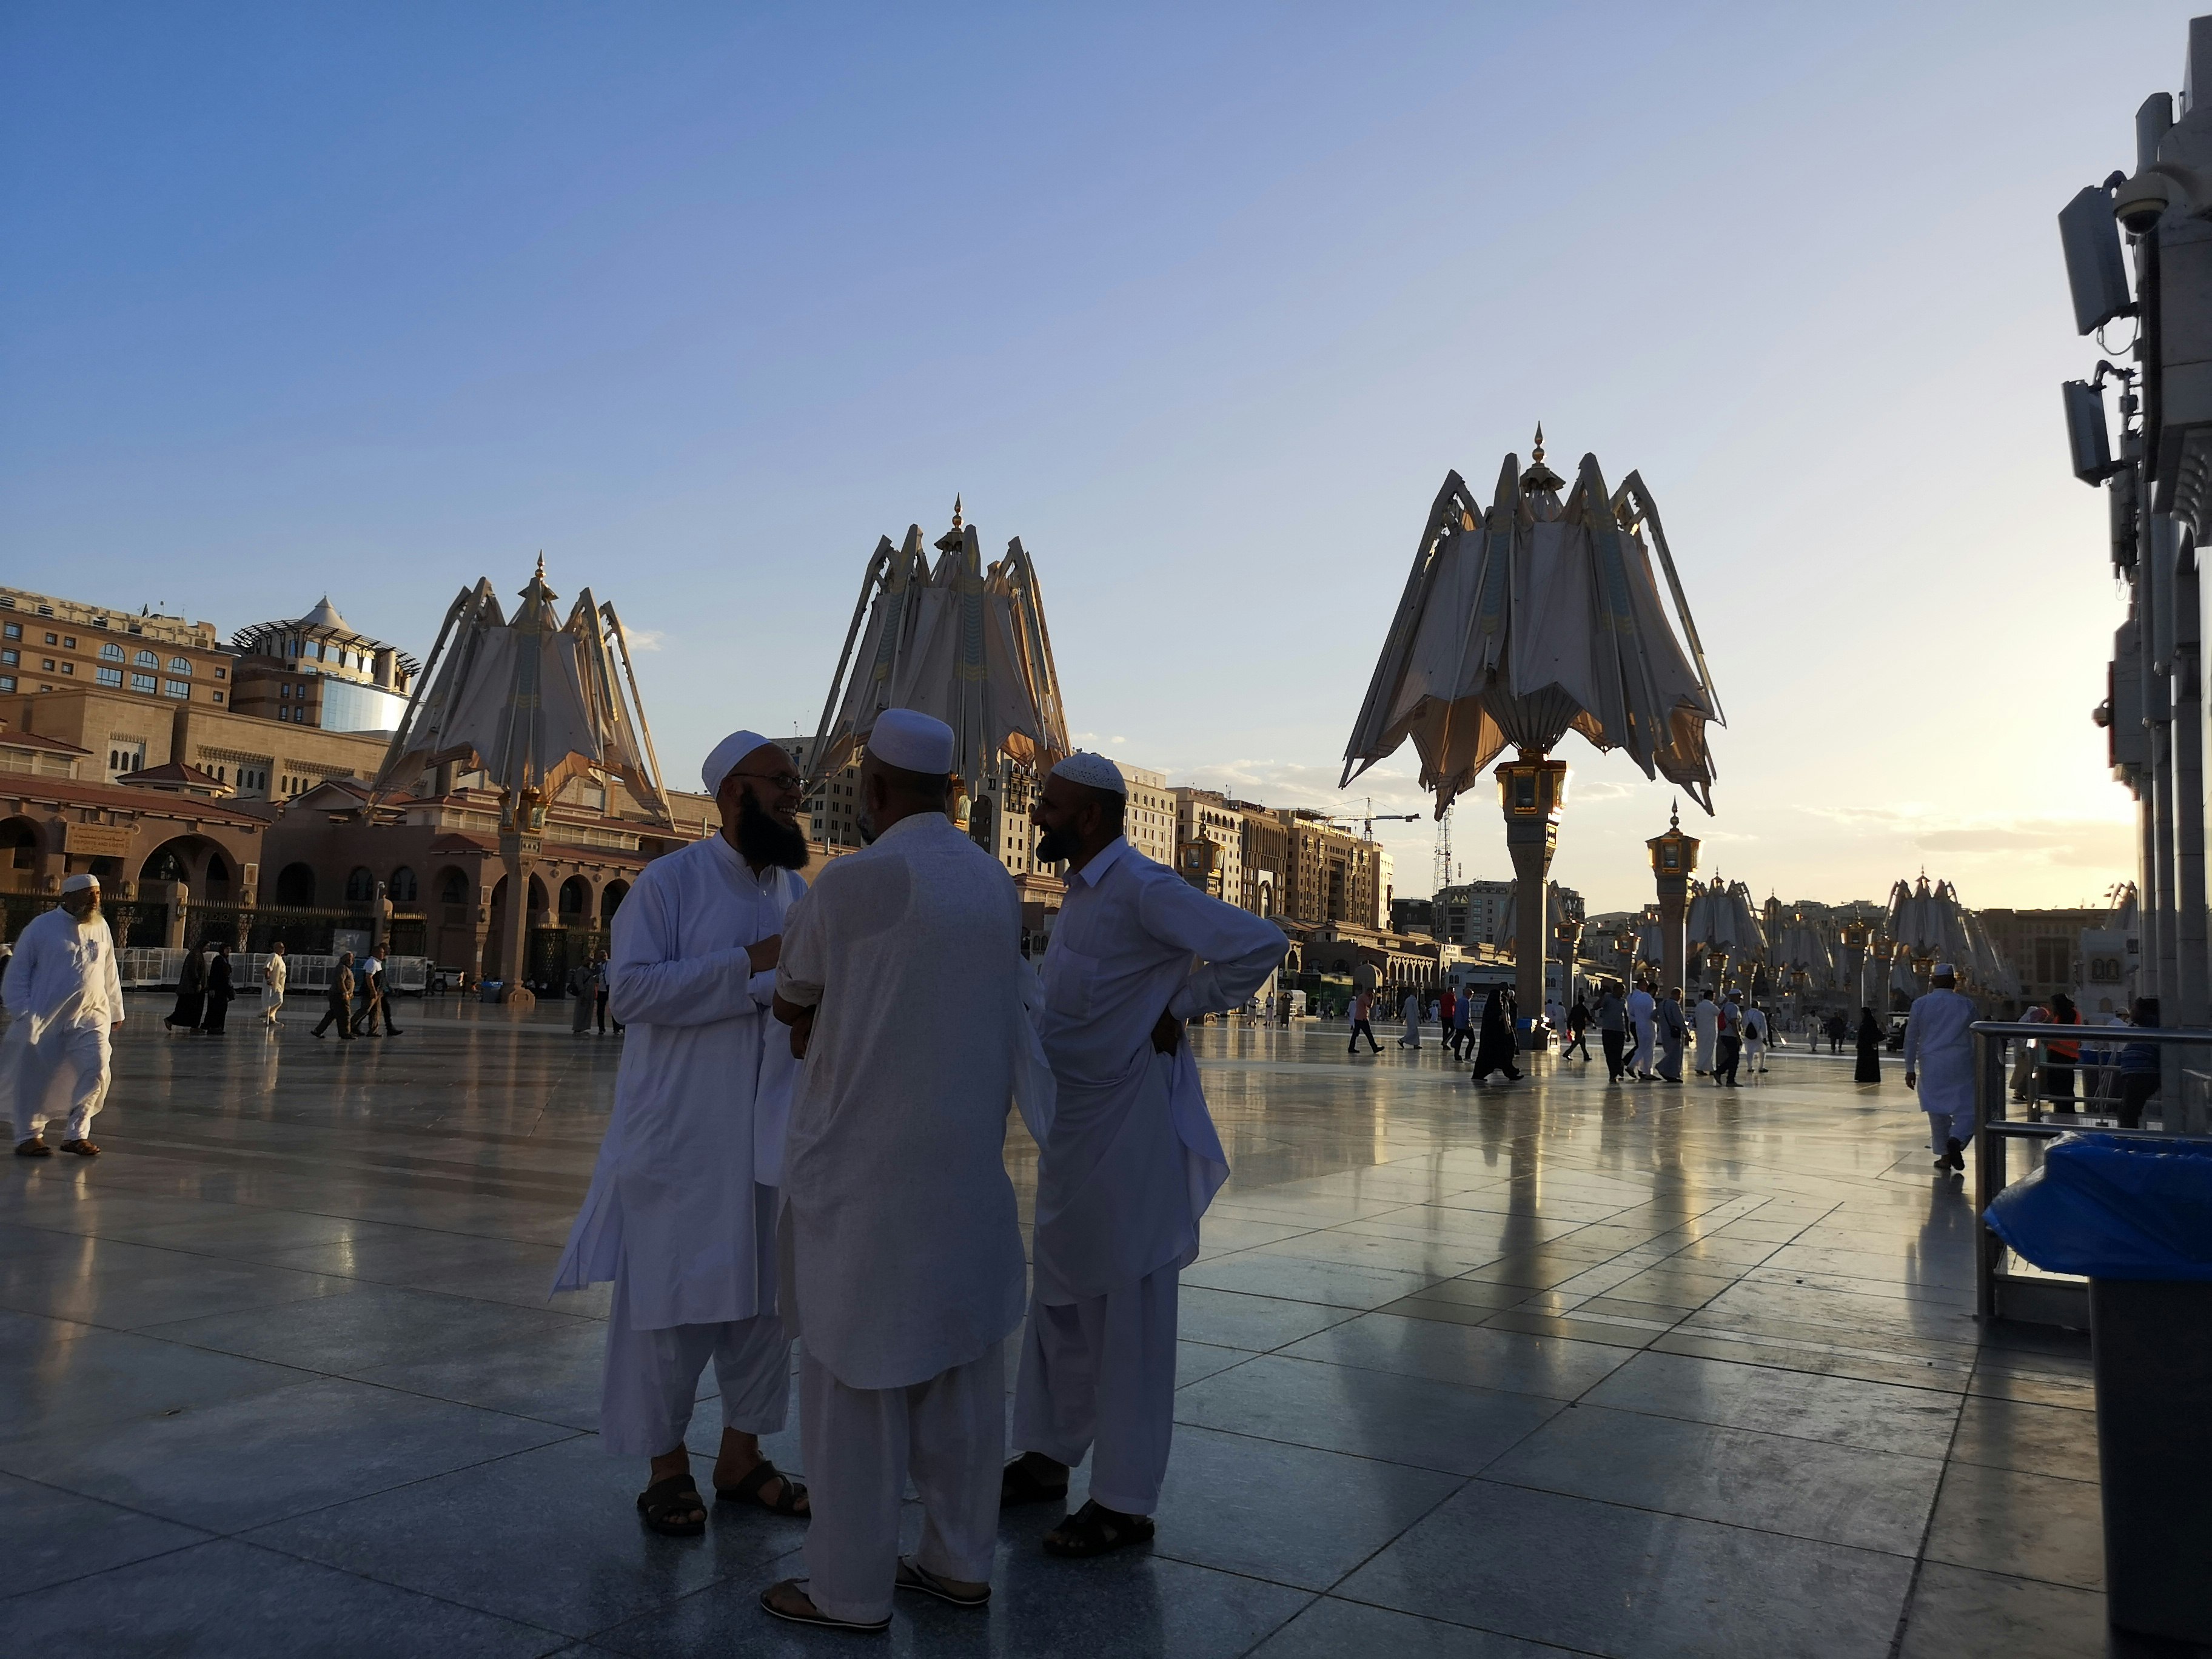 A group of men stand around the mechanical parasols at the mosque closing at sunset